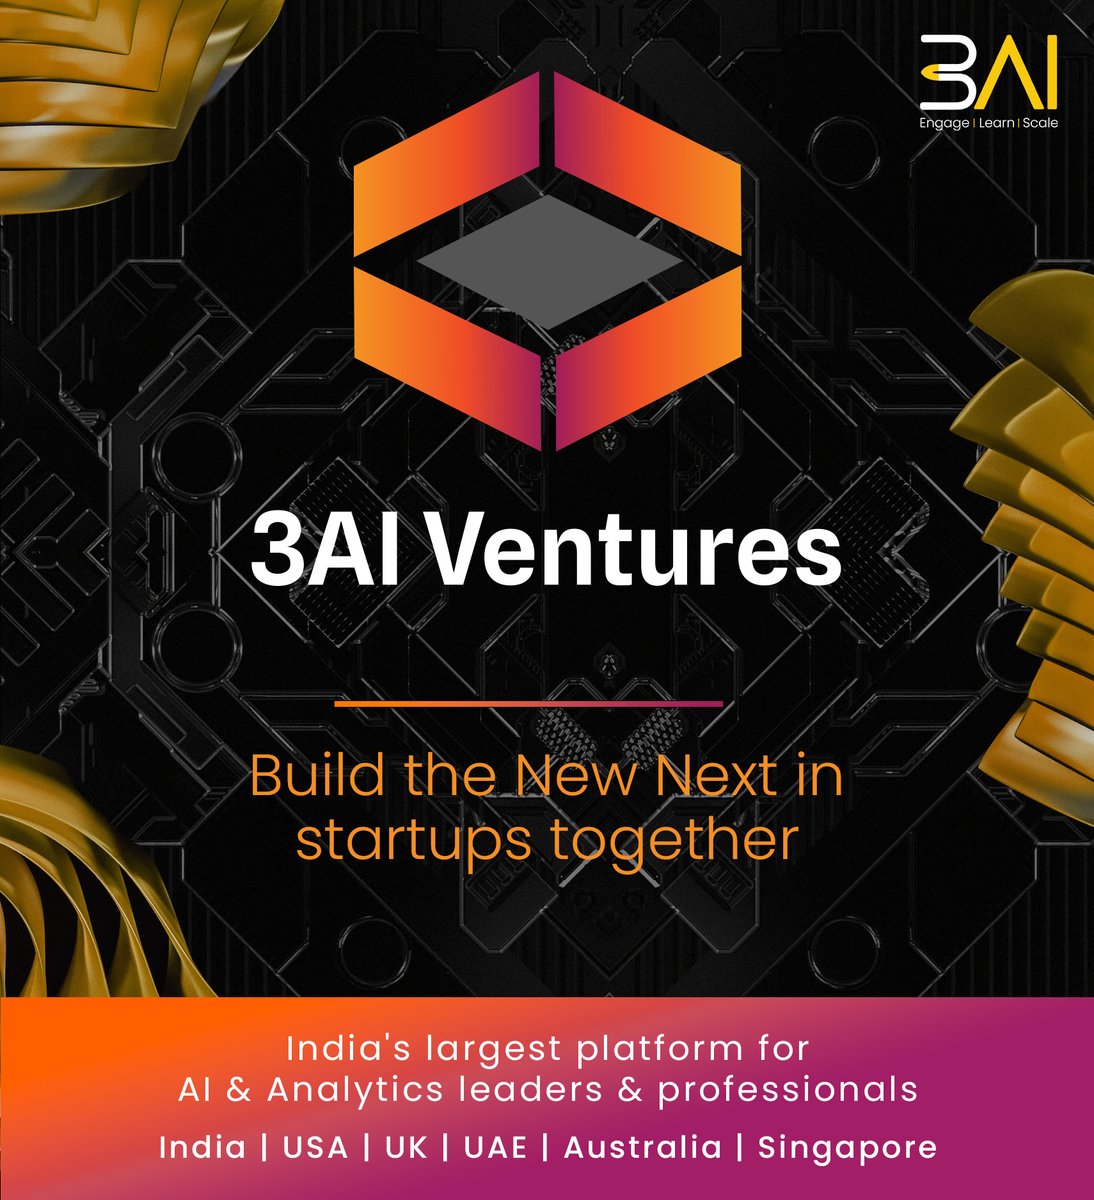 3AI Ventures is an exclusive network & syndicate of angel investors with a passion to invest in early stage businesses

Reach out to us for partnership opportunities at engage@3ai.in 

 #startups #angelinvesting #ai #analytics #data #3aiventures #gtmstrategy
@DhanrajaniS